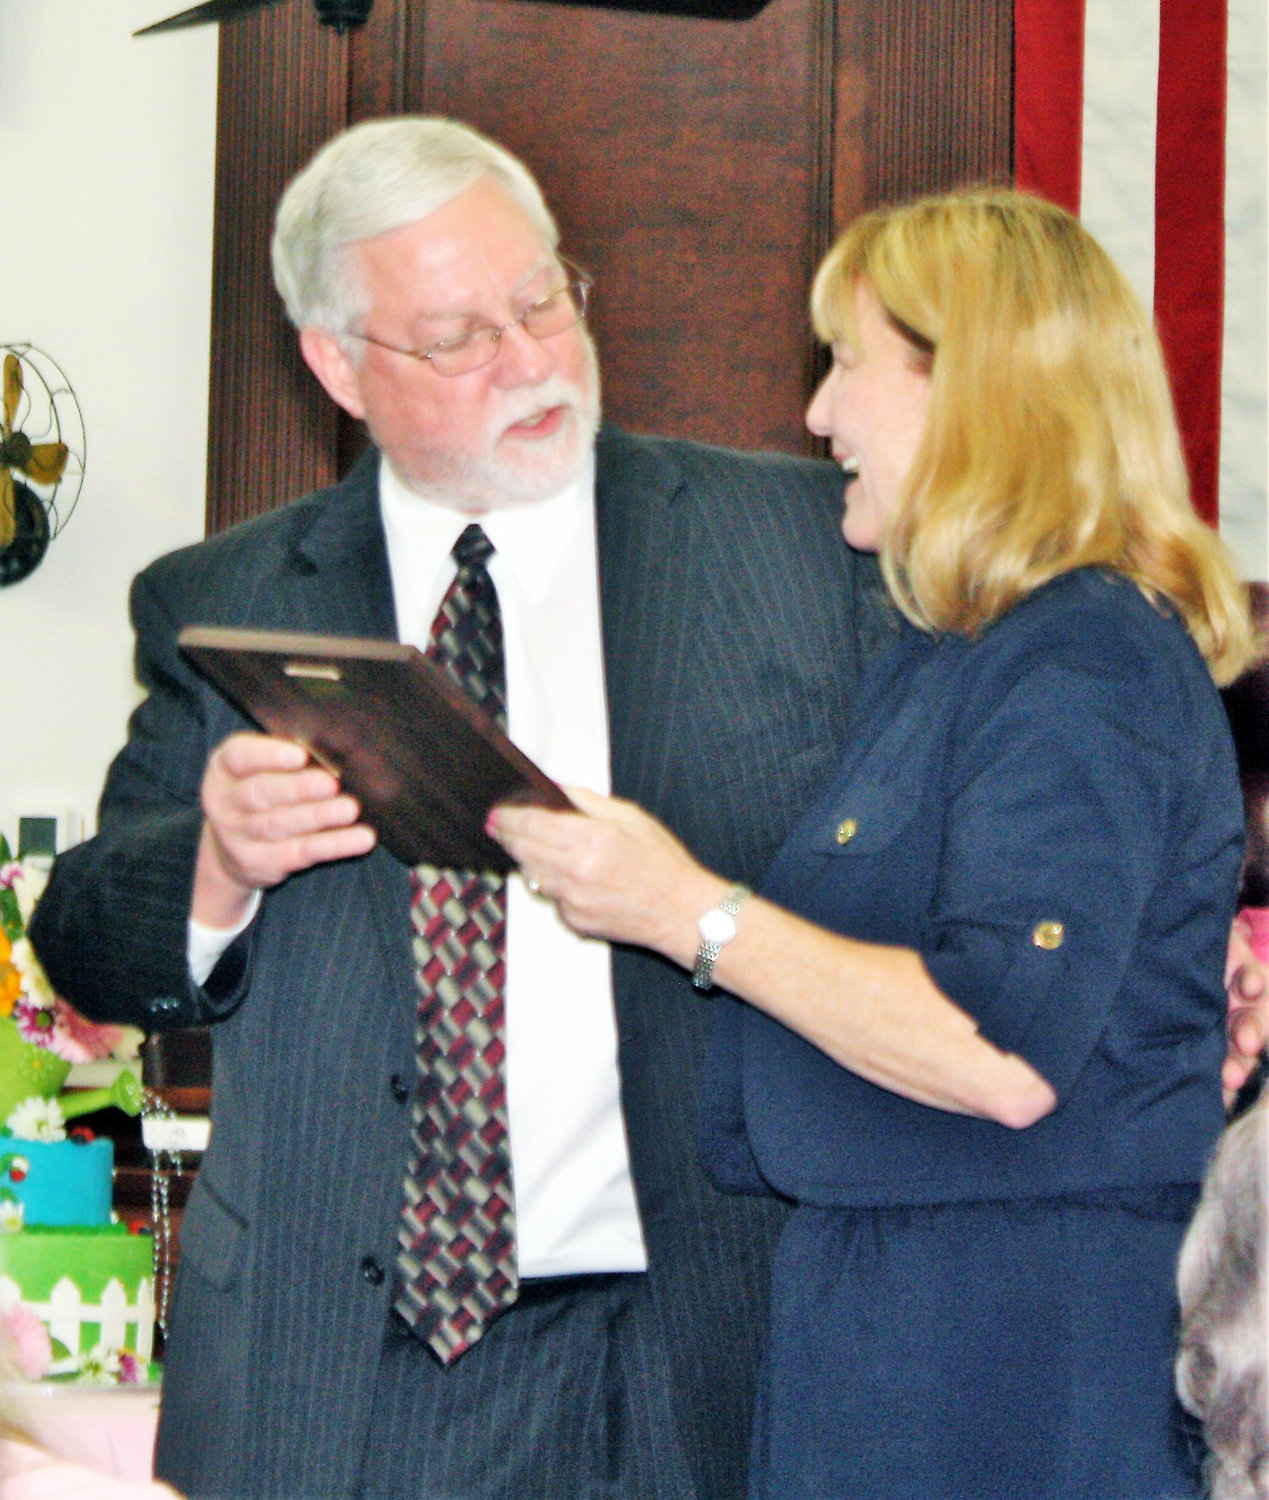 Wood County Judge Bryan Jeanes gives retiring Wood County District Clerk Jenica Turner her retirement plaque after 28 years of service to the county, including 15 years as district clerk.